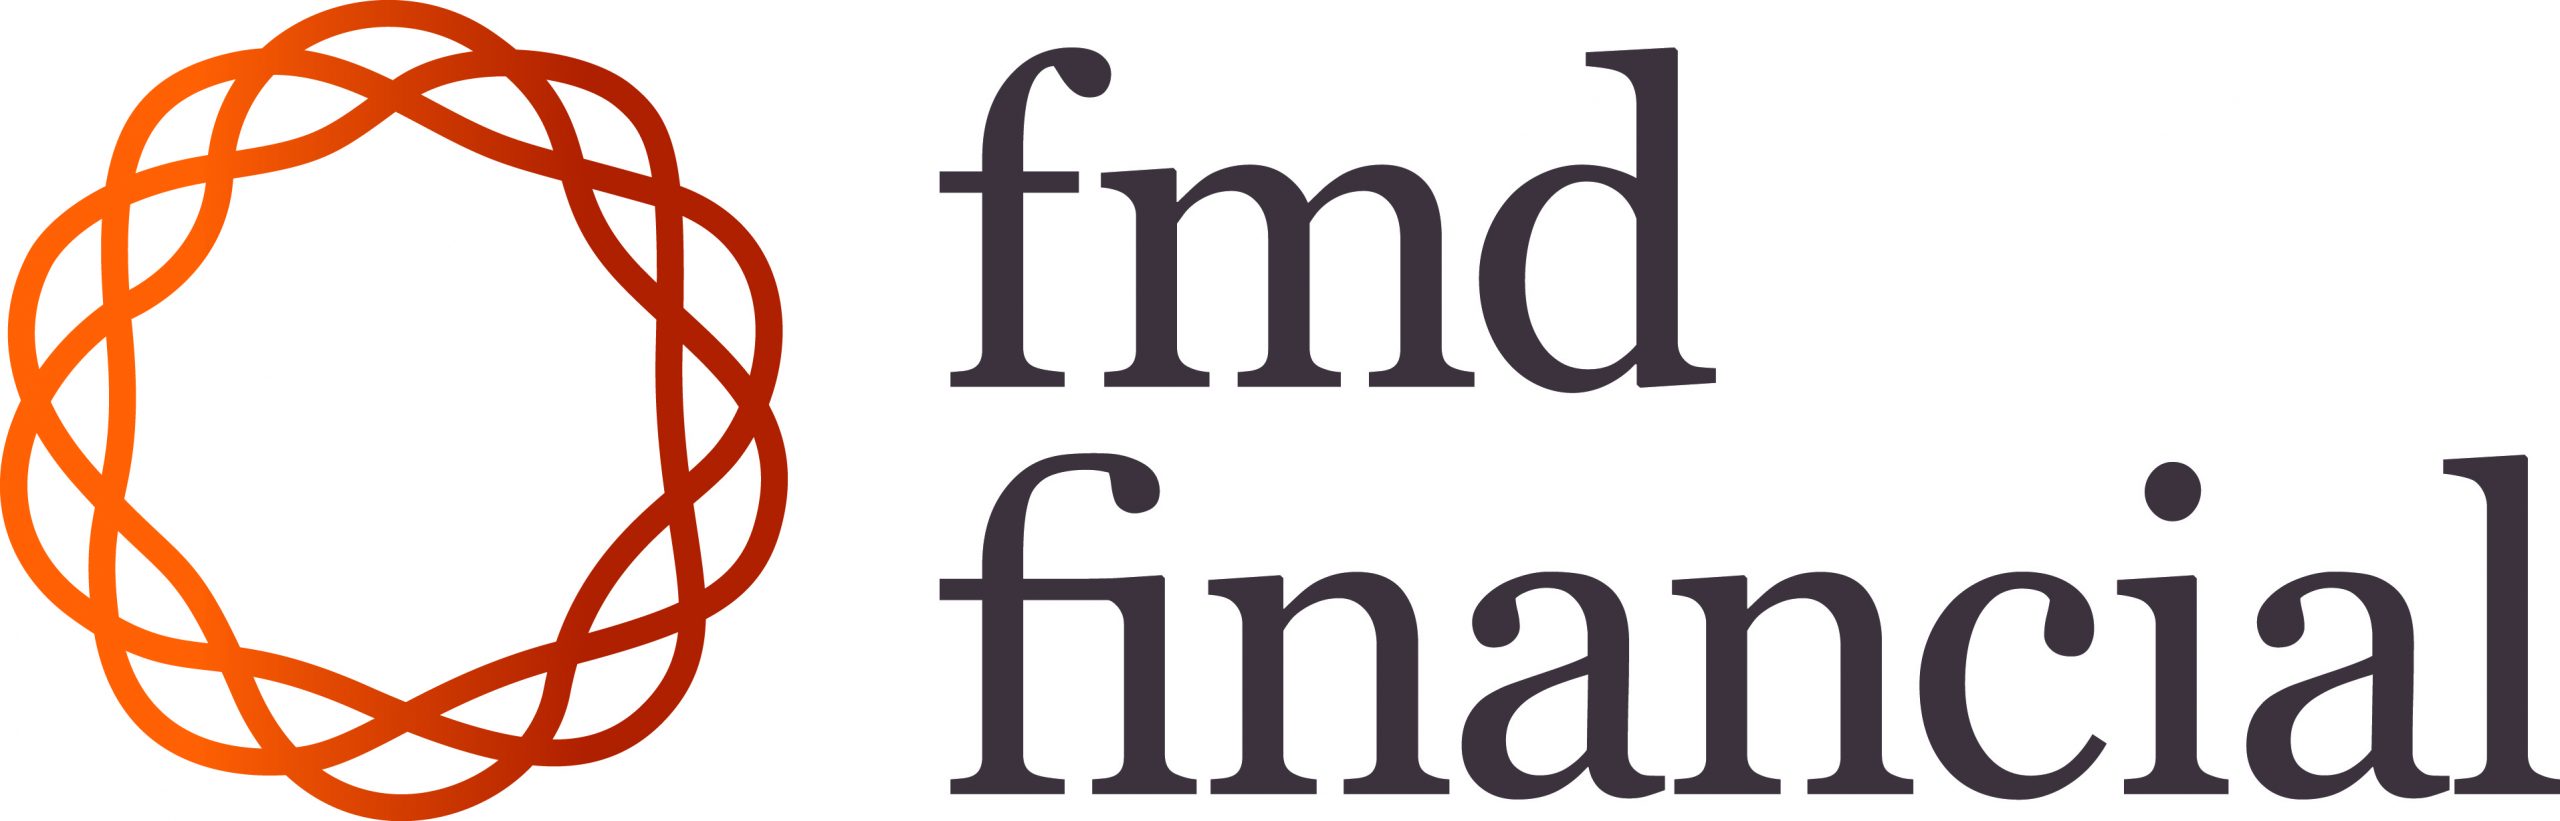 FMD logo: orange and red lines entwined in a circle with FMD Financial words in grey.